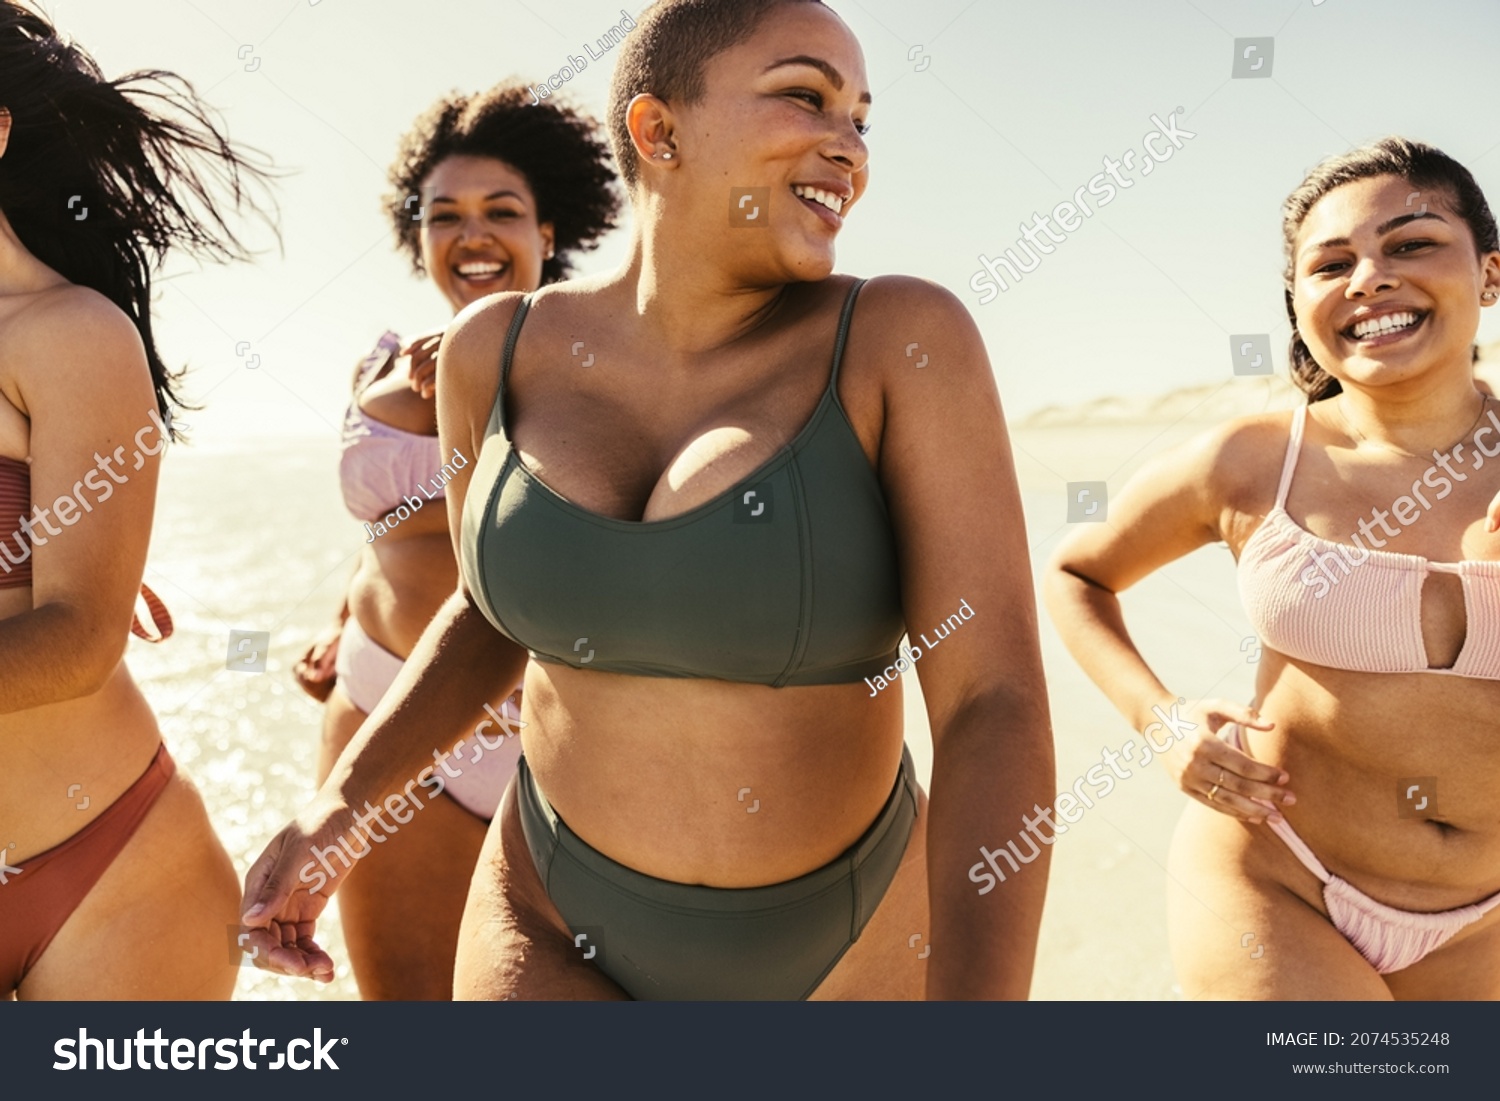 Women running in bikinis at the beach. Group of carefree young women smiling cheerfully while running in the sun. Happy female friends having fun and enjoying their summer vacation. #2074535248